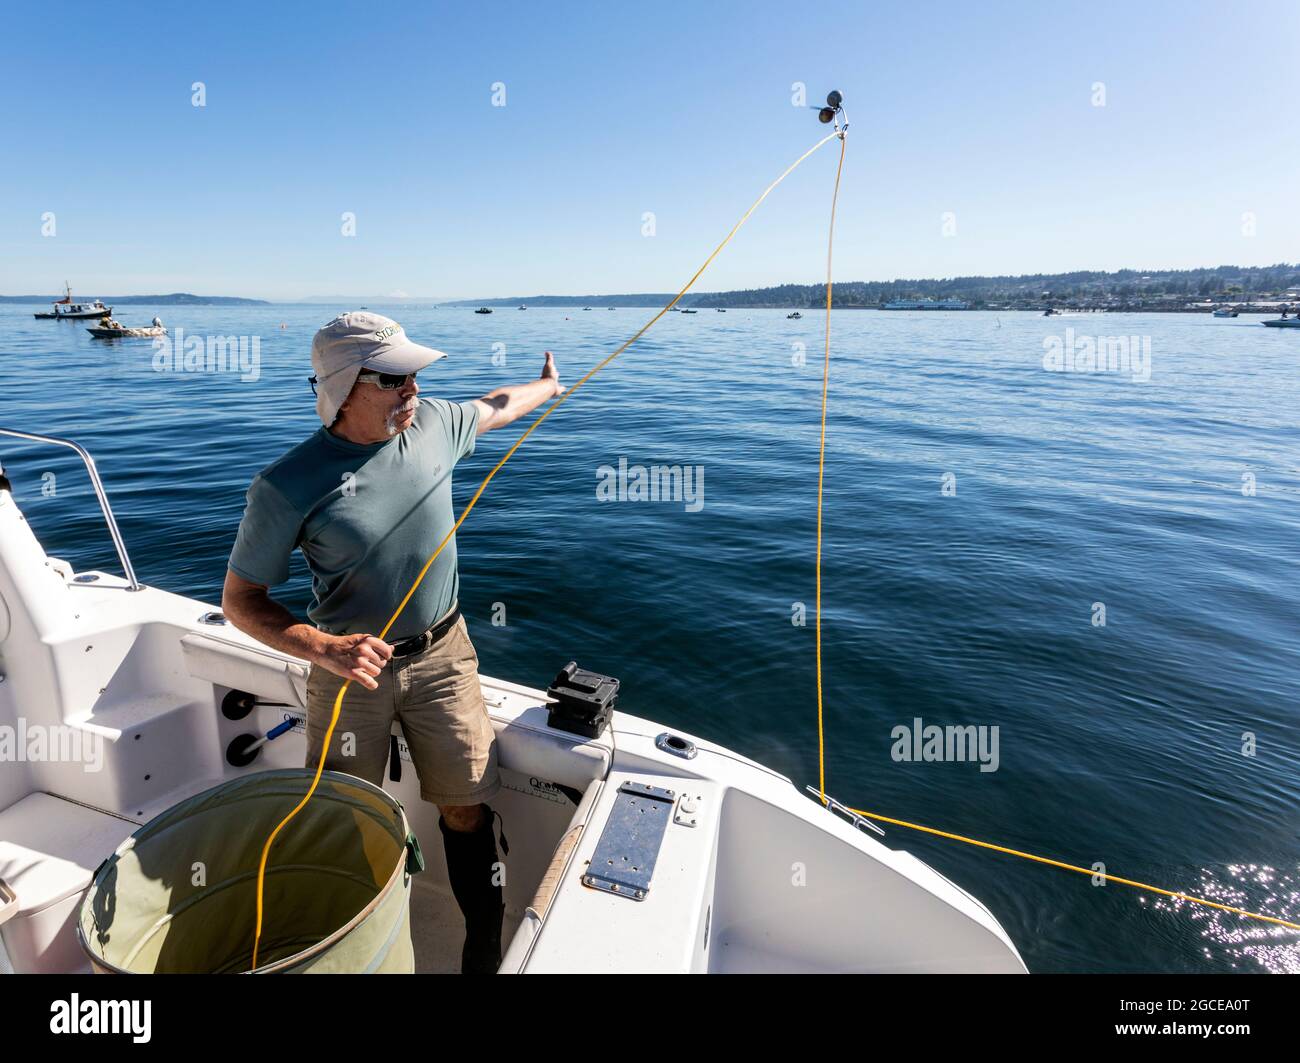 WA20275-00.....WASHINGTON - Phil Russell tosses out a line weight attached to a shrimp pot in the Puget Sound. Stock Photo